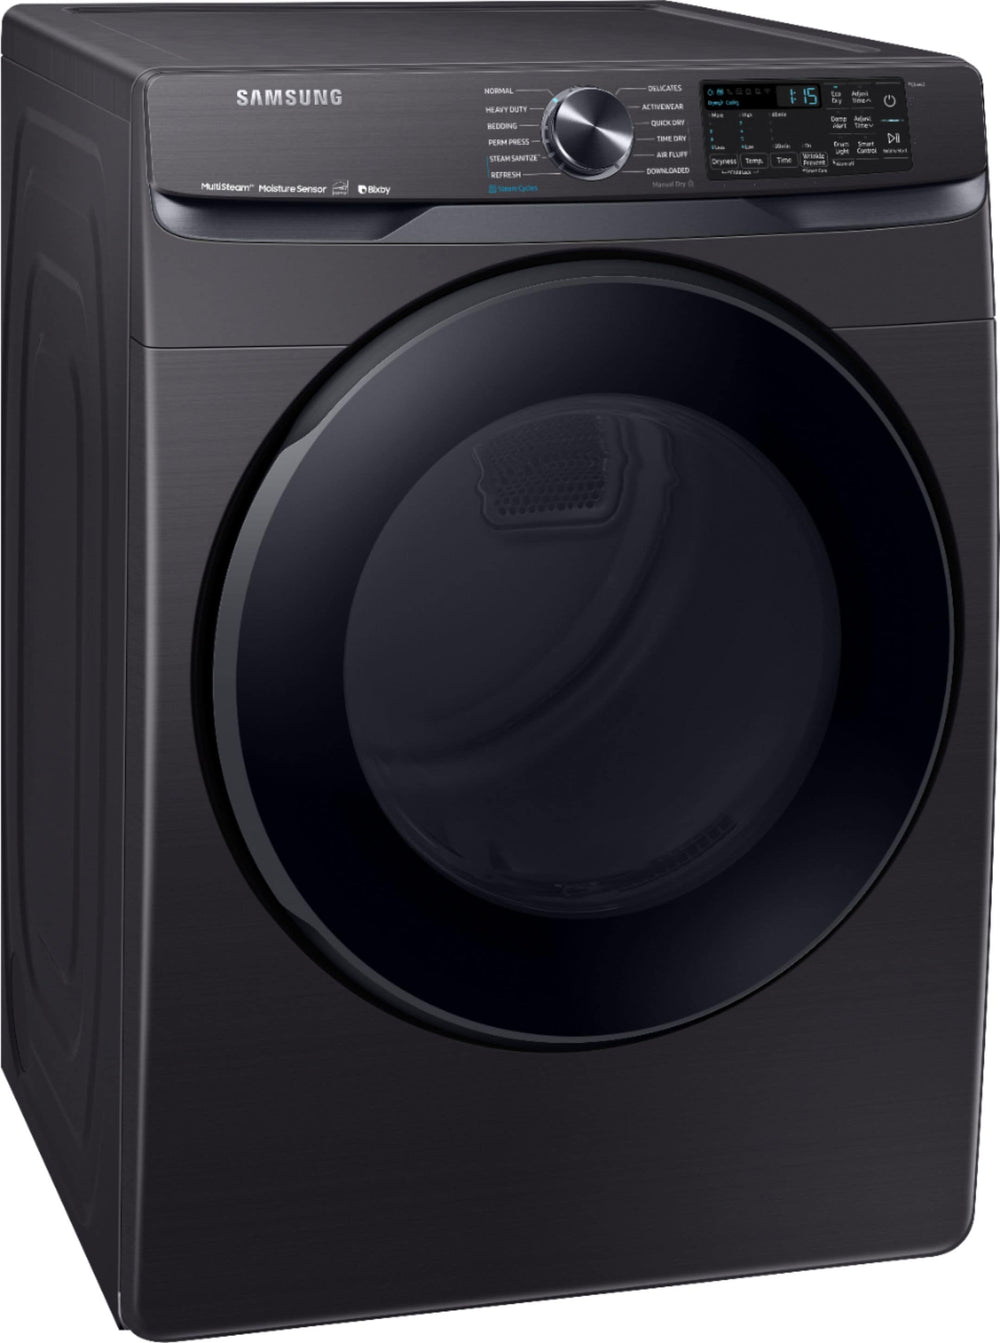 Samsung - 7.5 Cu. Ft. Stackable Smart Electric Dryer with Steam and Sensor Dry - Black stainless steel_1